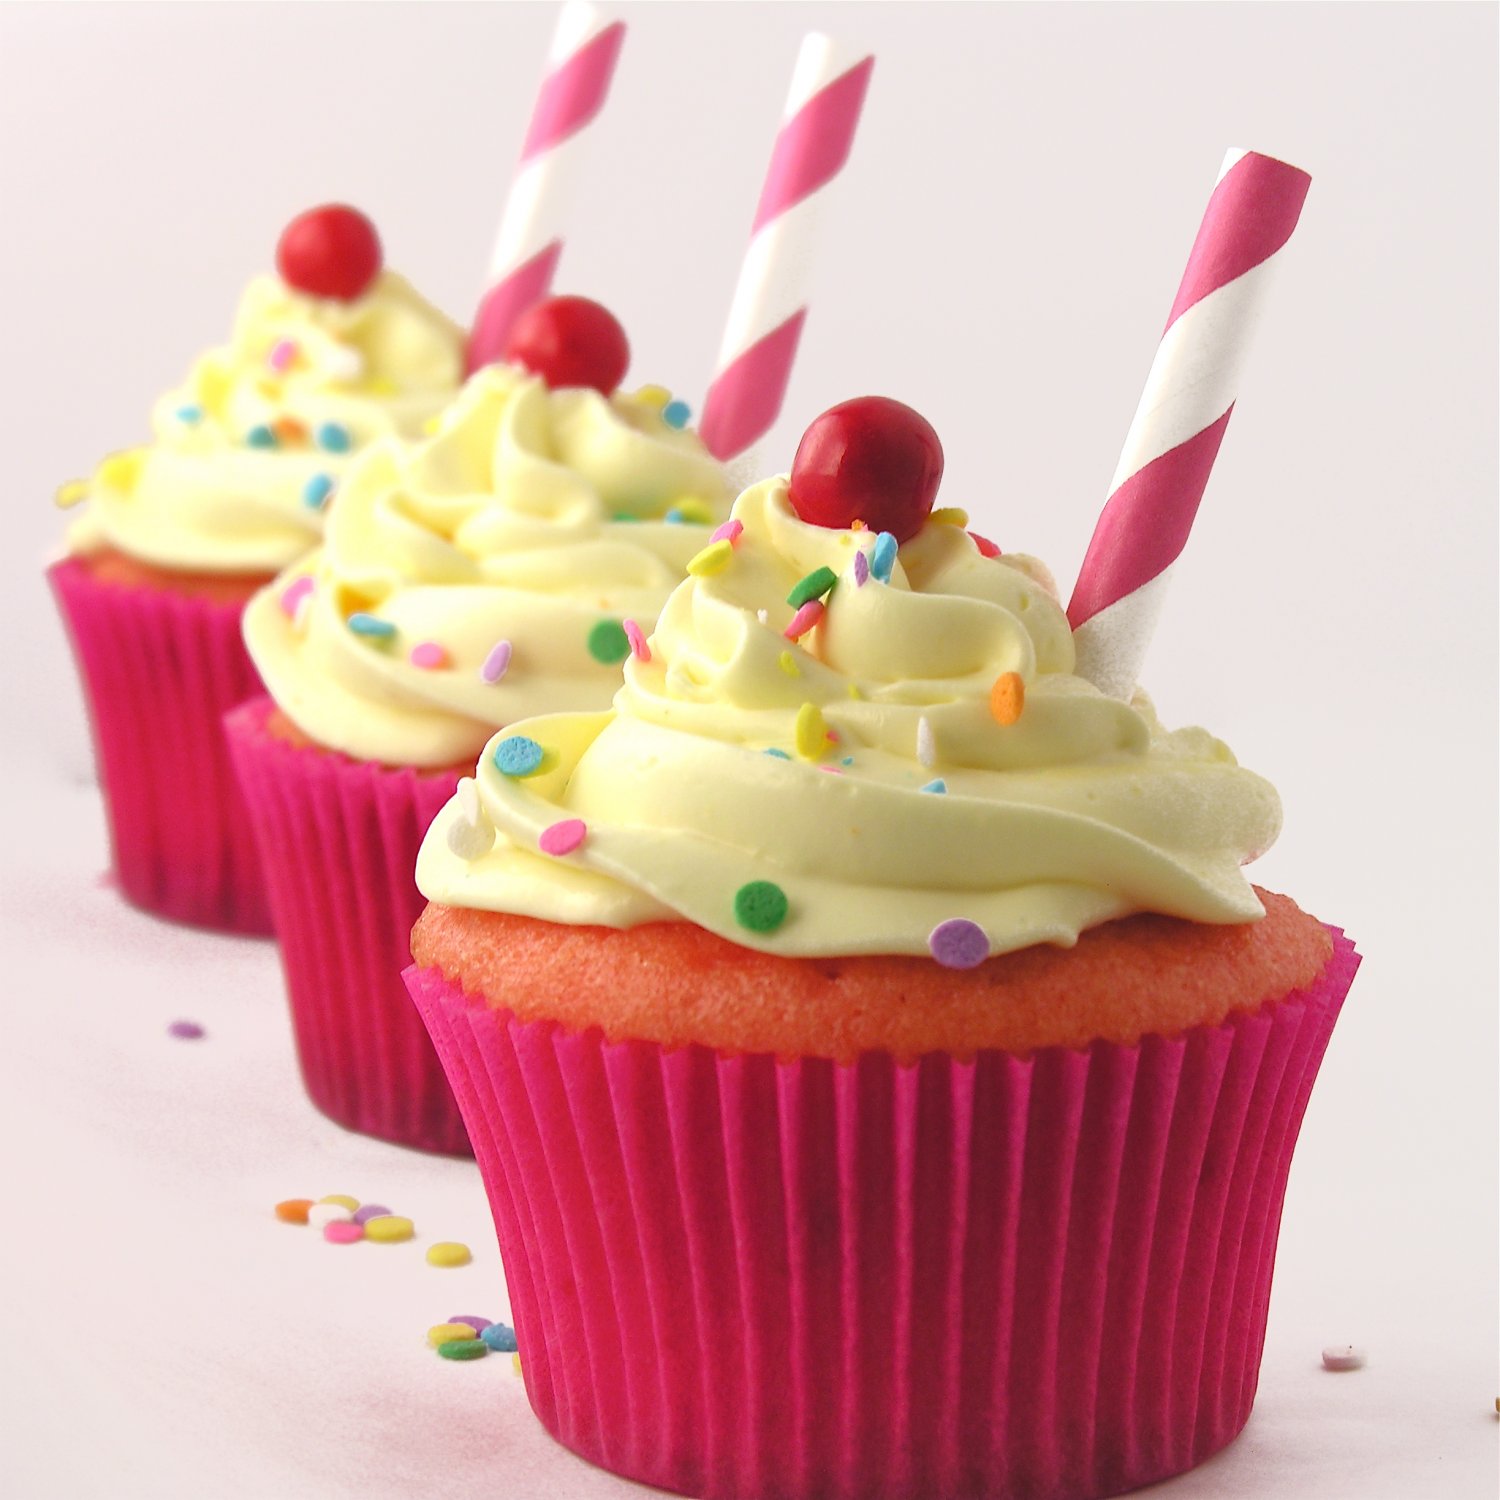 I sure Do Learn. how to Make Money From Your Efforts As A Cupcake Queen or ...